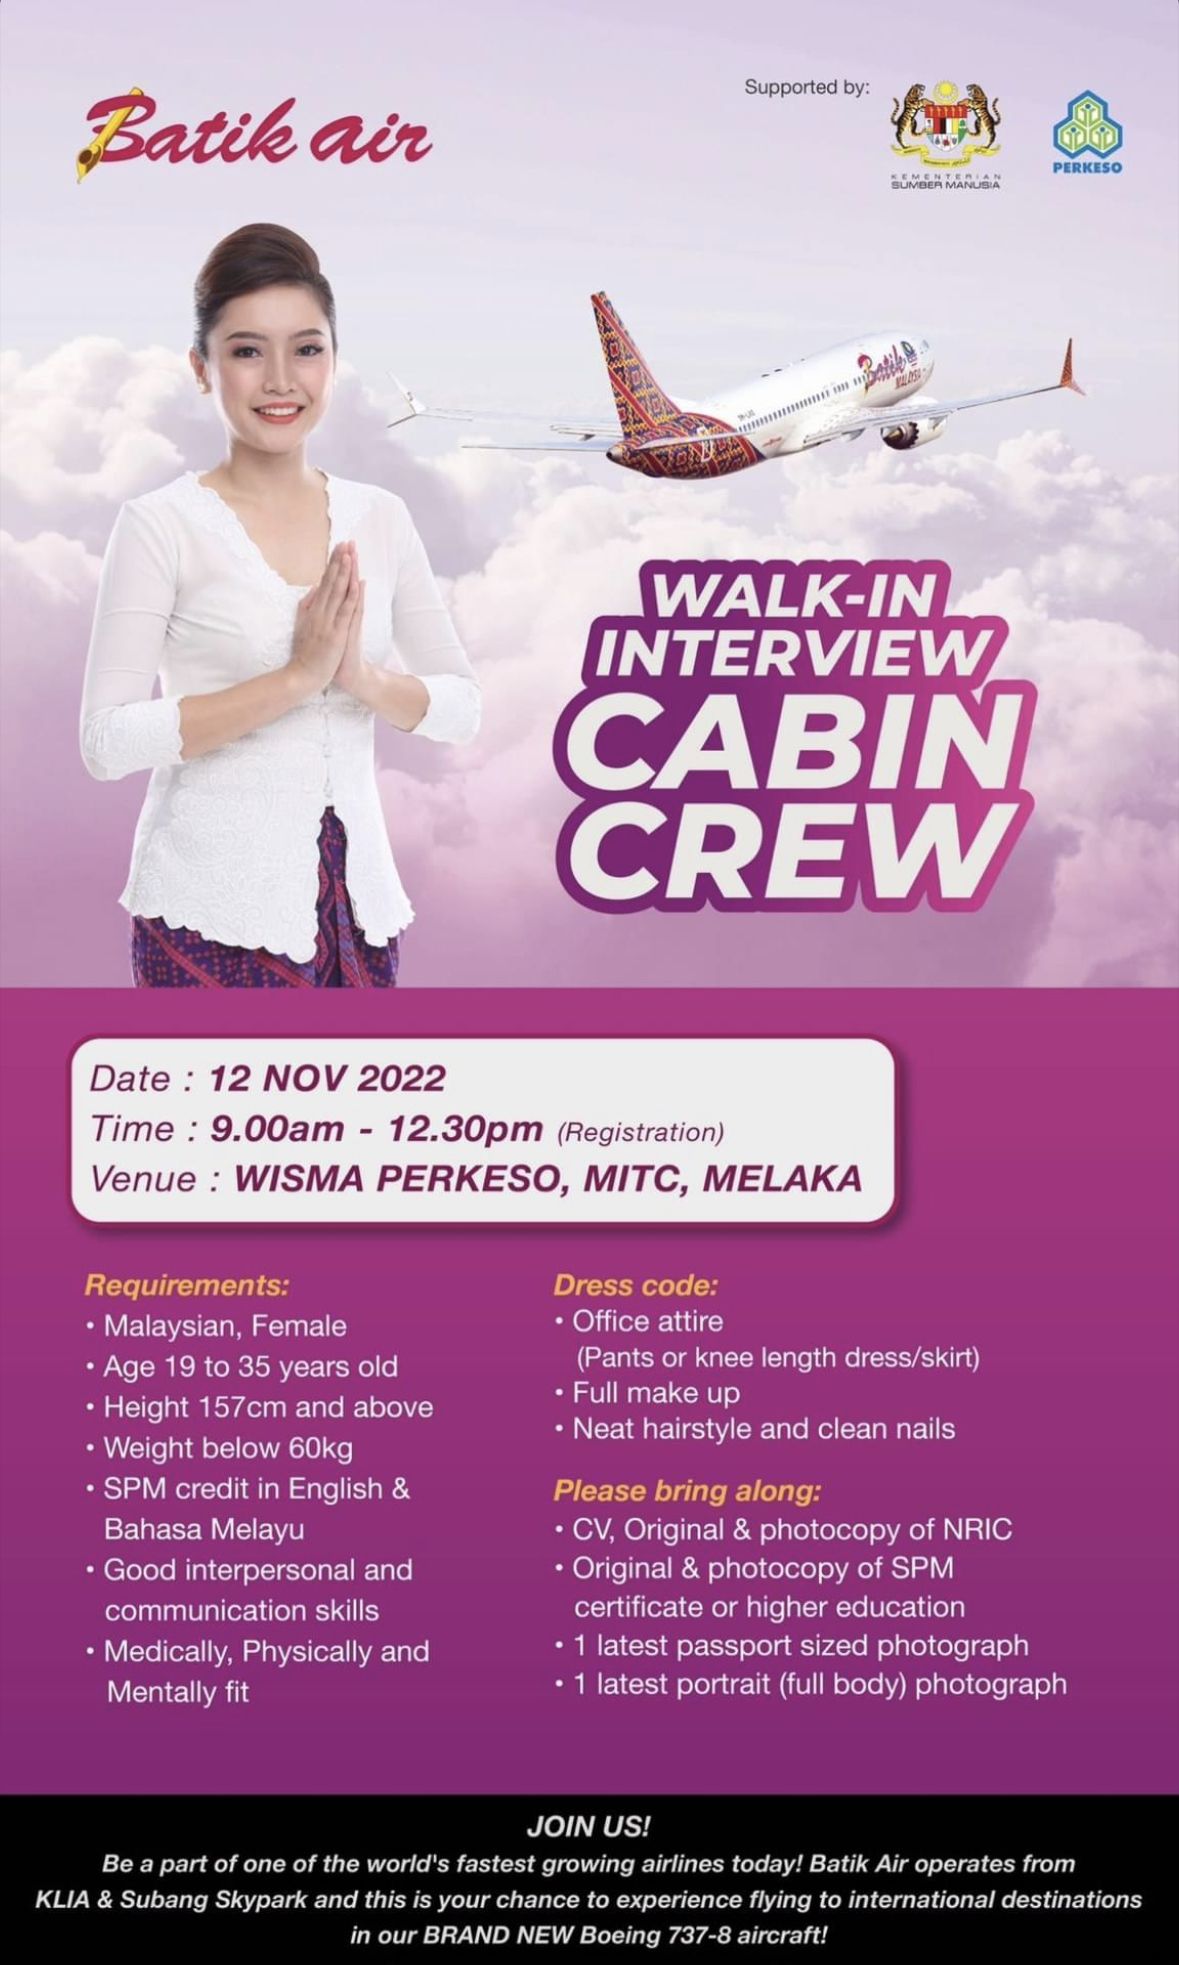 Cabin Crew assessment day CV reviews and Emirates Qatar and Etihad final  interview